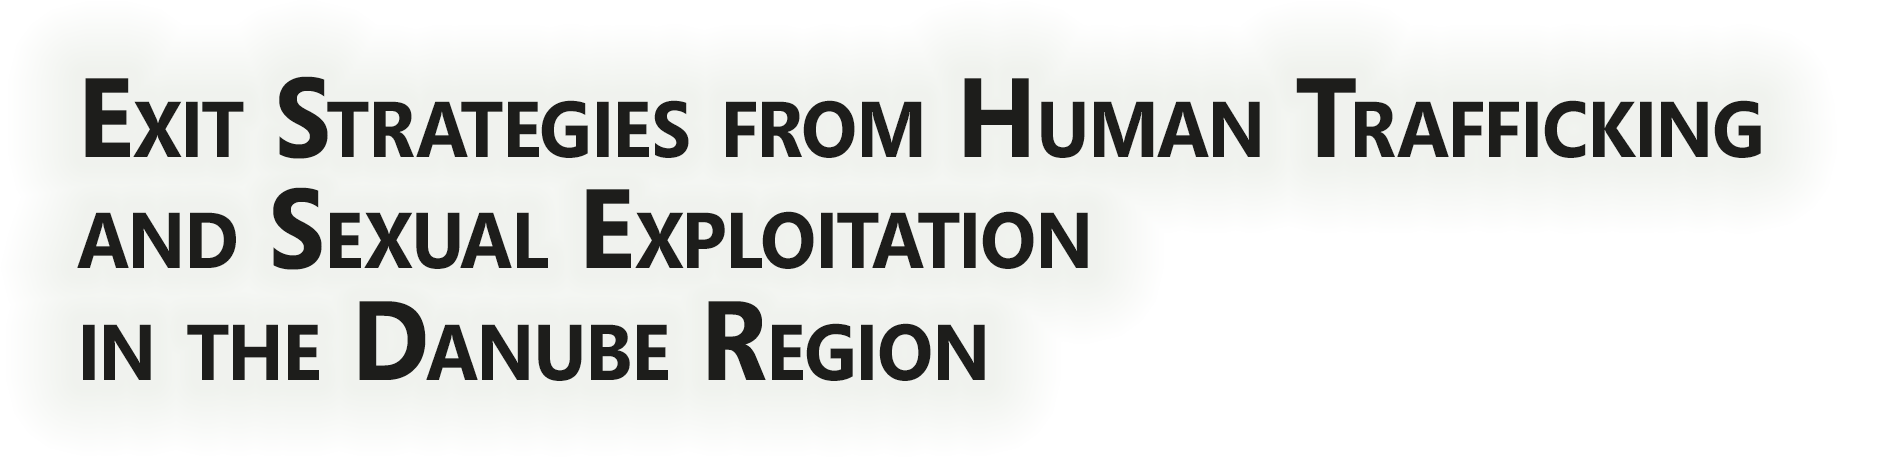 Exit strategies from human trafficking and sexual exploitation in the danube region